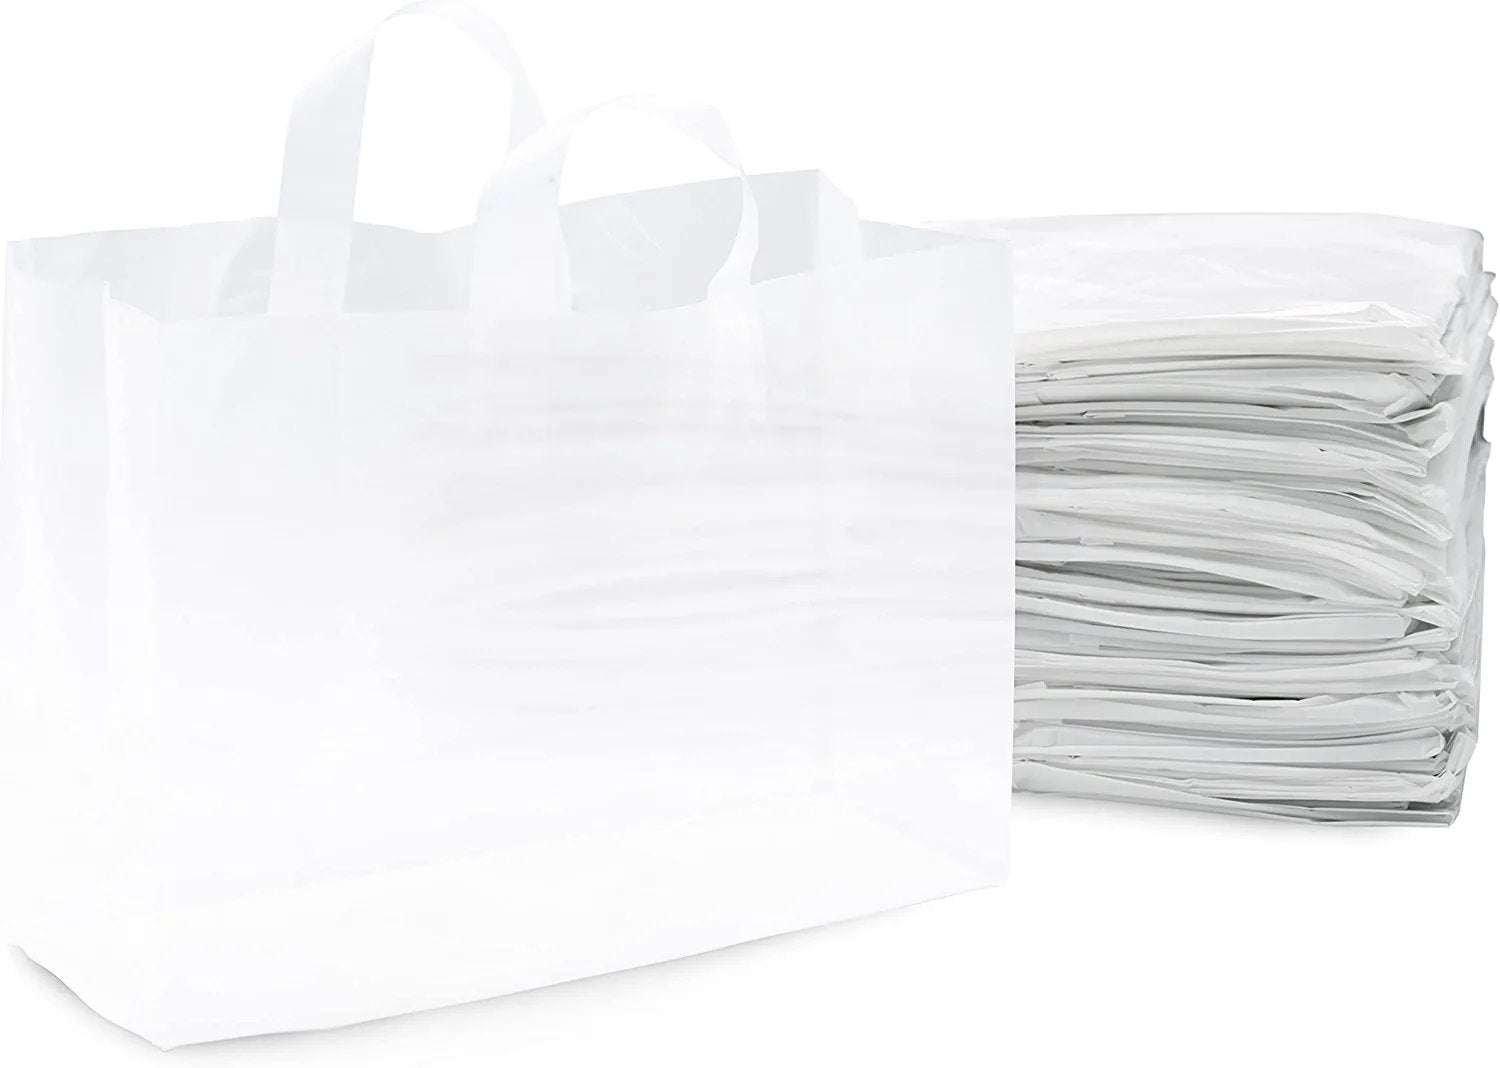 Shopping Bags for Small Business - 50 Pack Clear Plastic Bags, Large White Frosted Plastic Bags with Handles & Cardboard Bottom for Boutique, Merchandise, Retail, Gifts, Parties, Events - 16x6x12